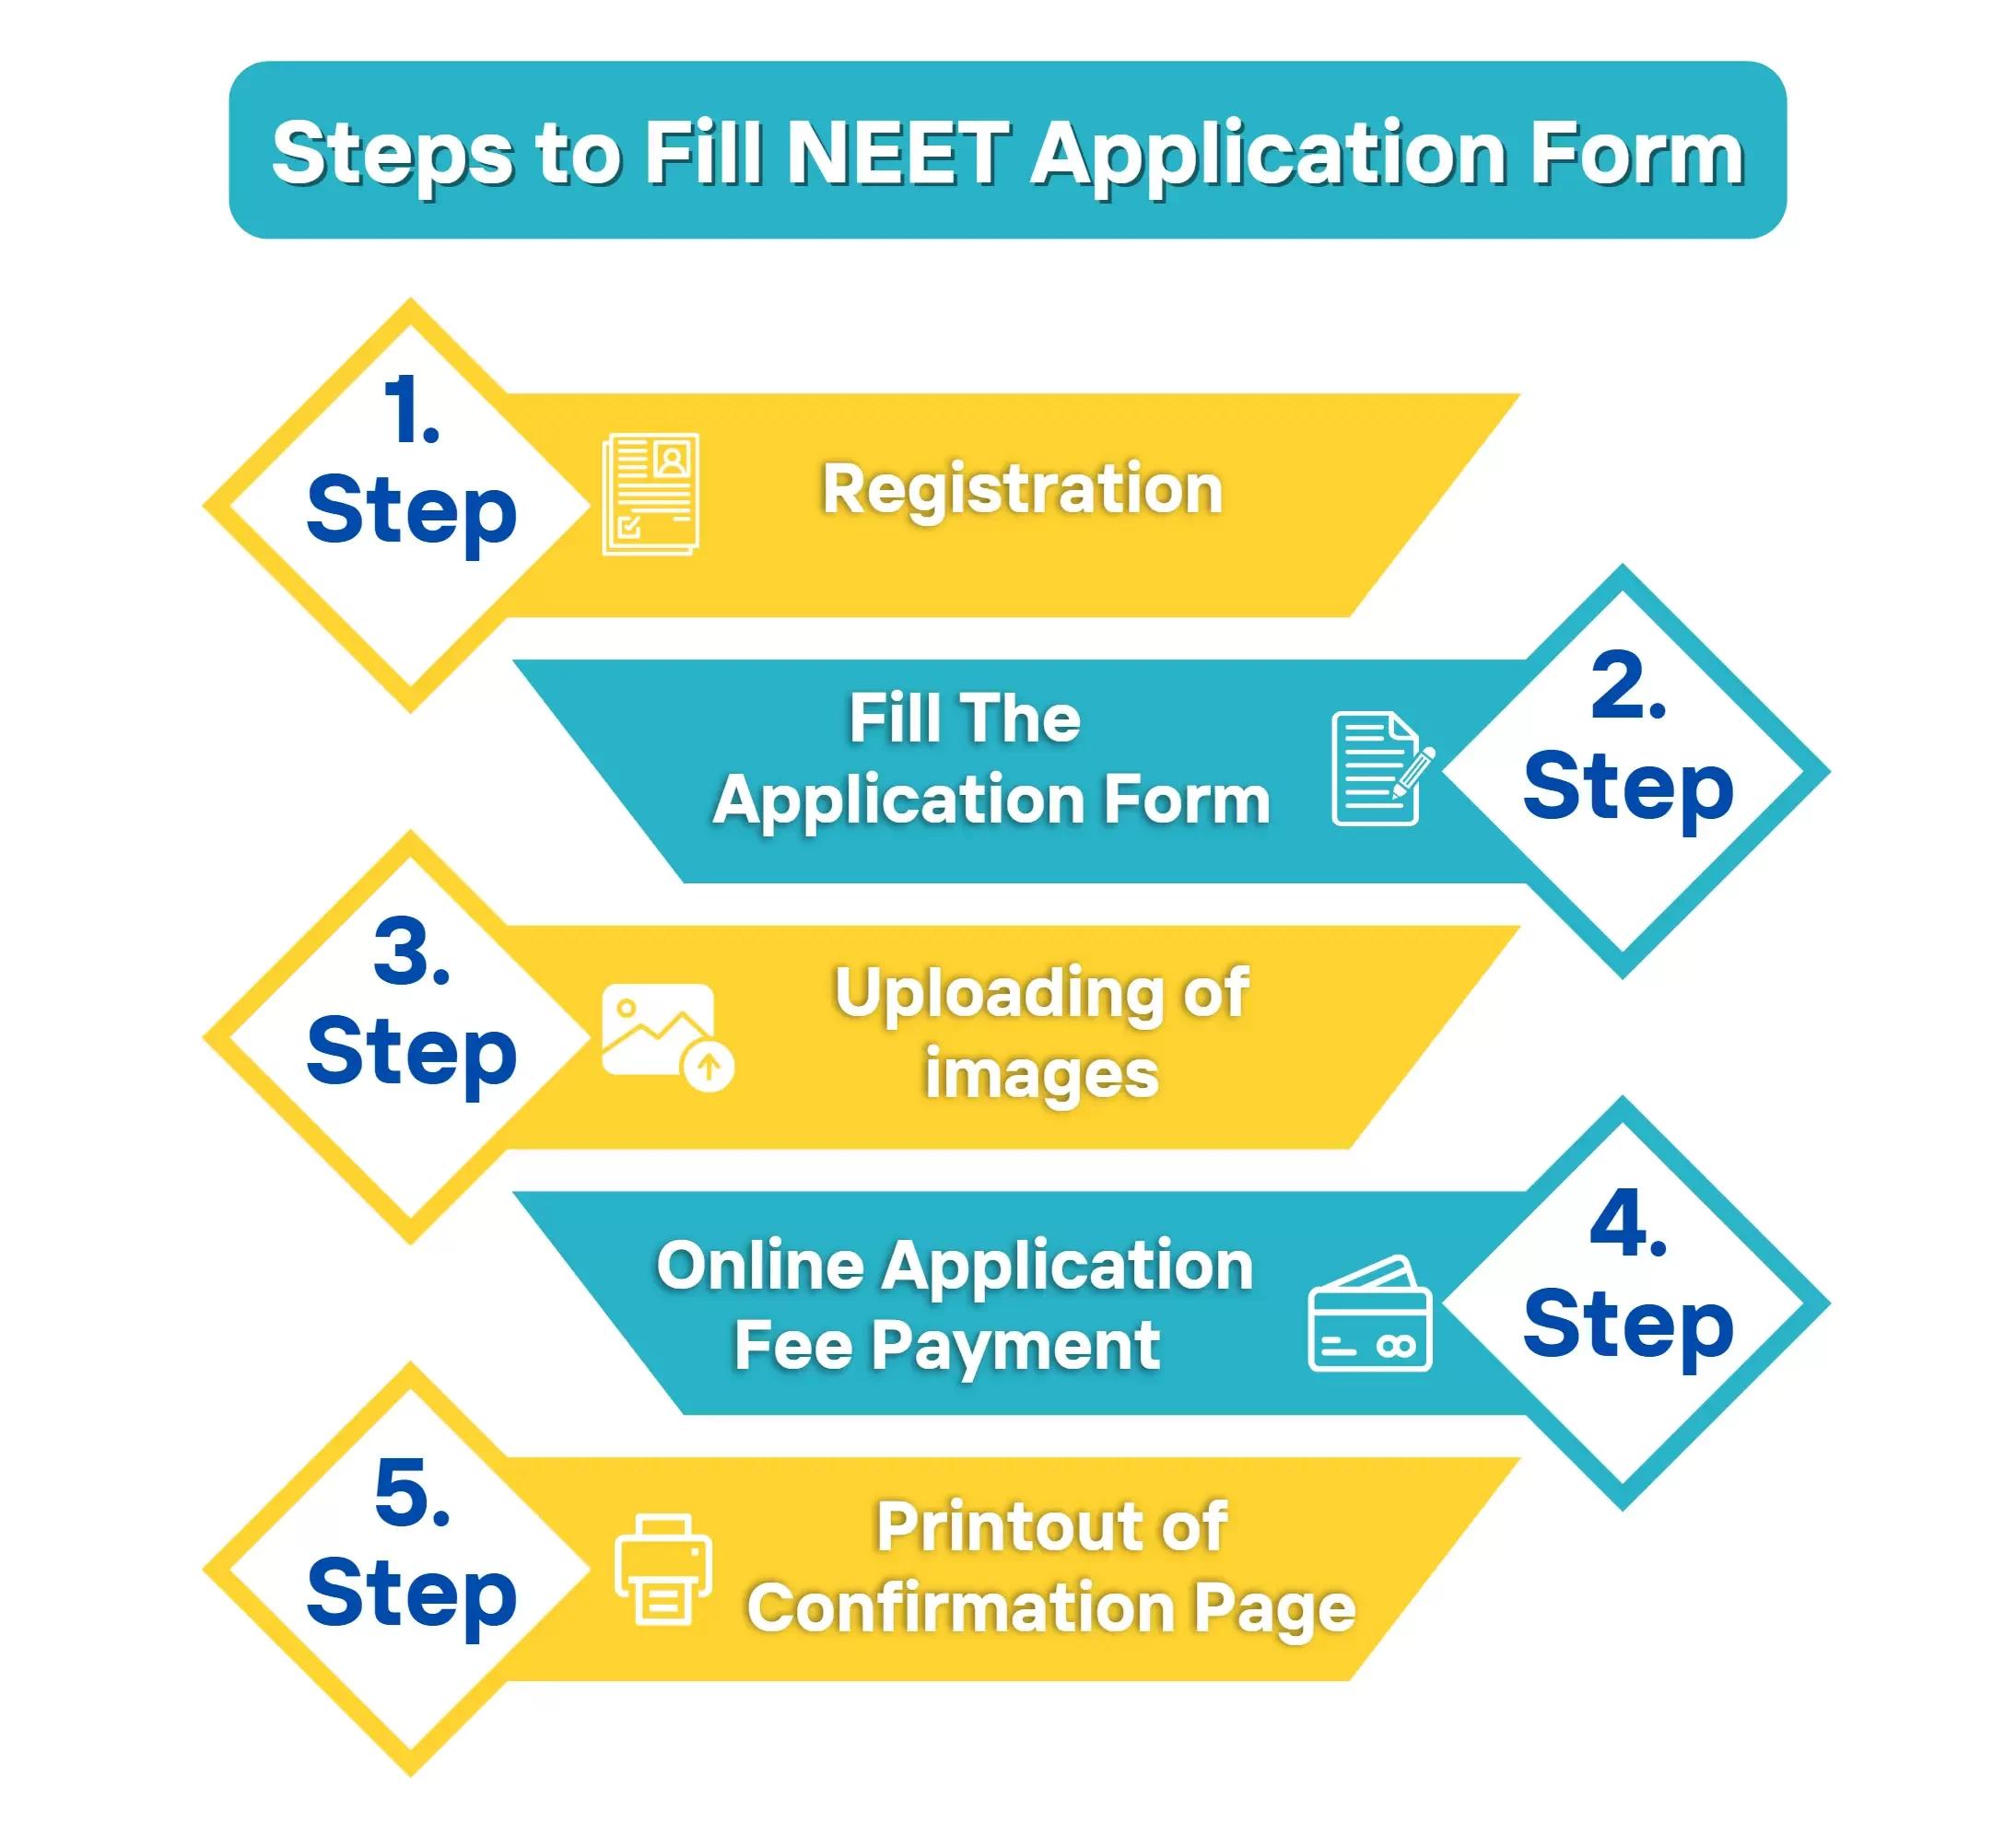 Steps to fill NEET Application Form